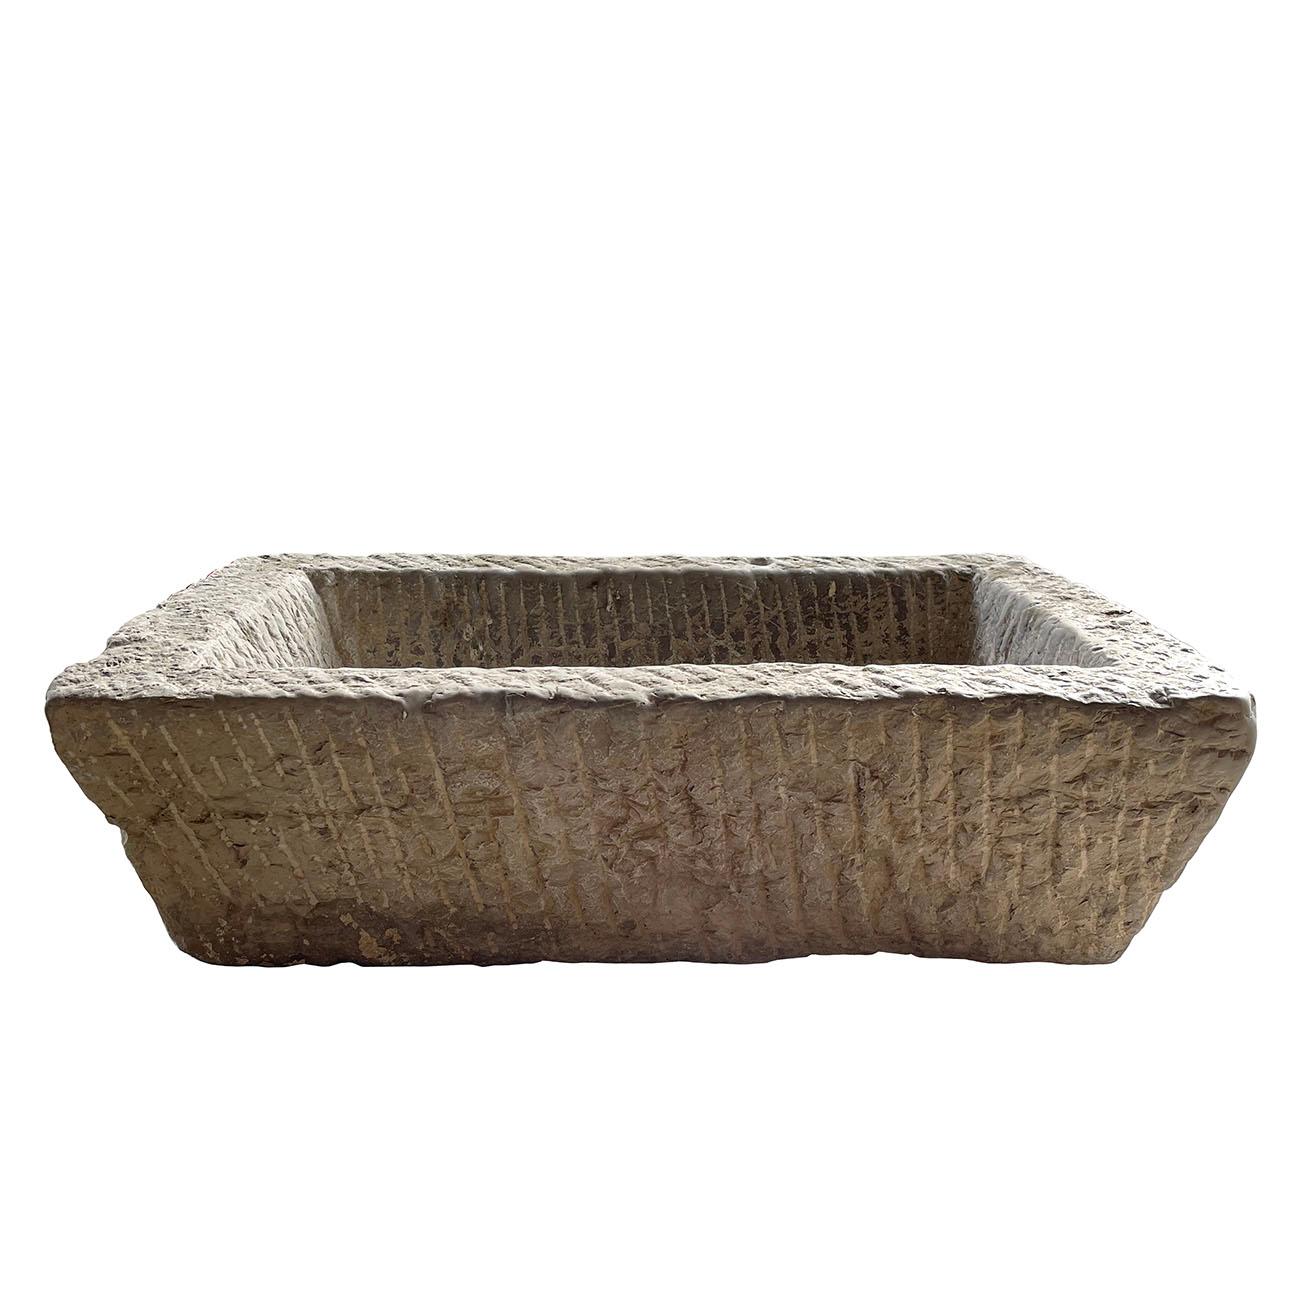 19th Century Antique Chinese Hand Chiseled Stone Trough, Planter For Sale 5